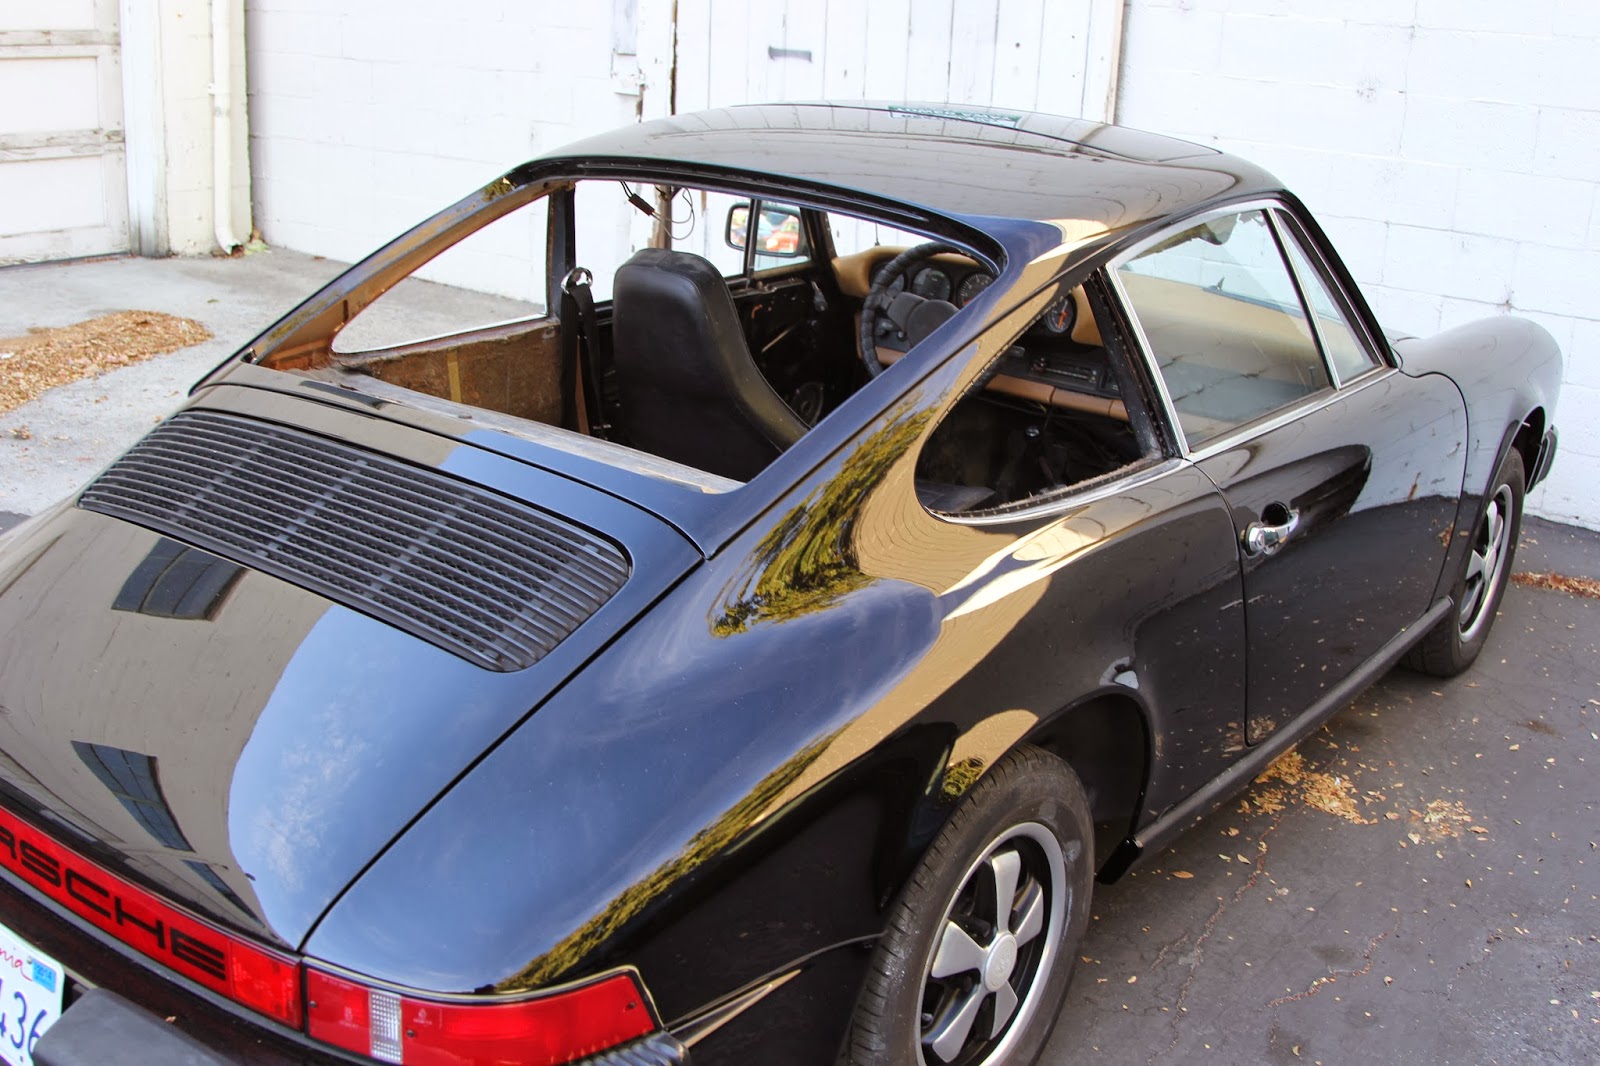 Cooks Upholstery and Classic Restoration: Auto Interior Restoration Bay